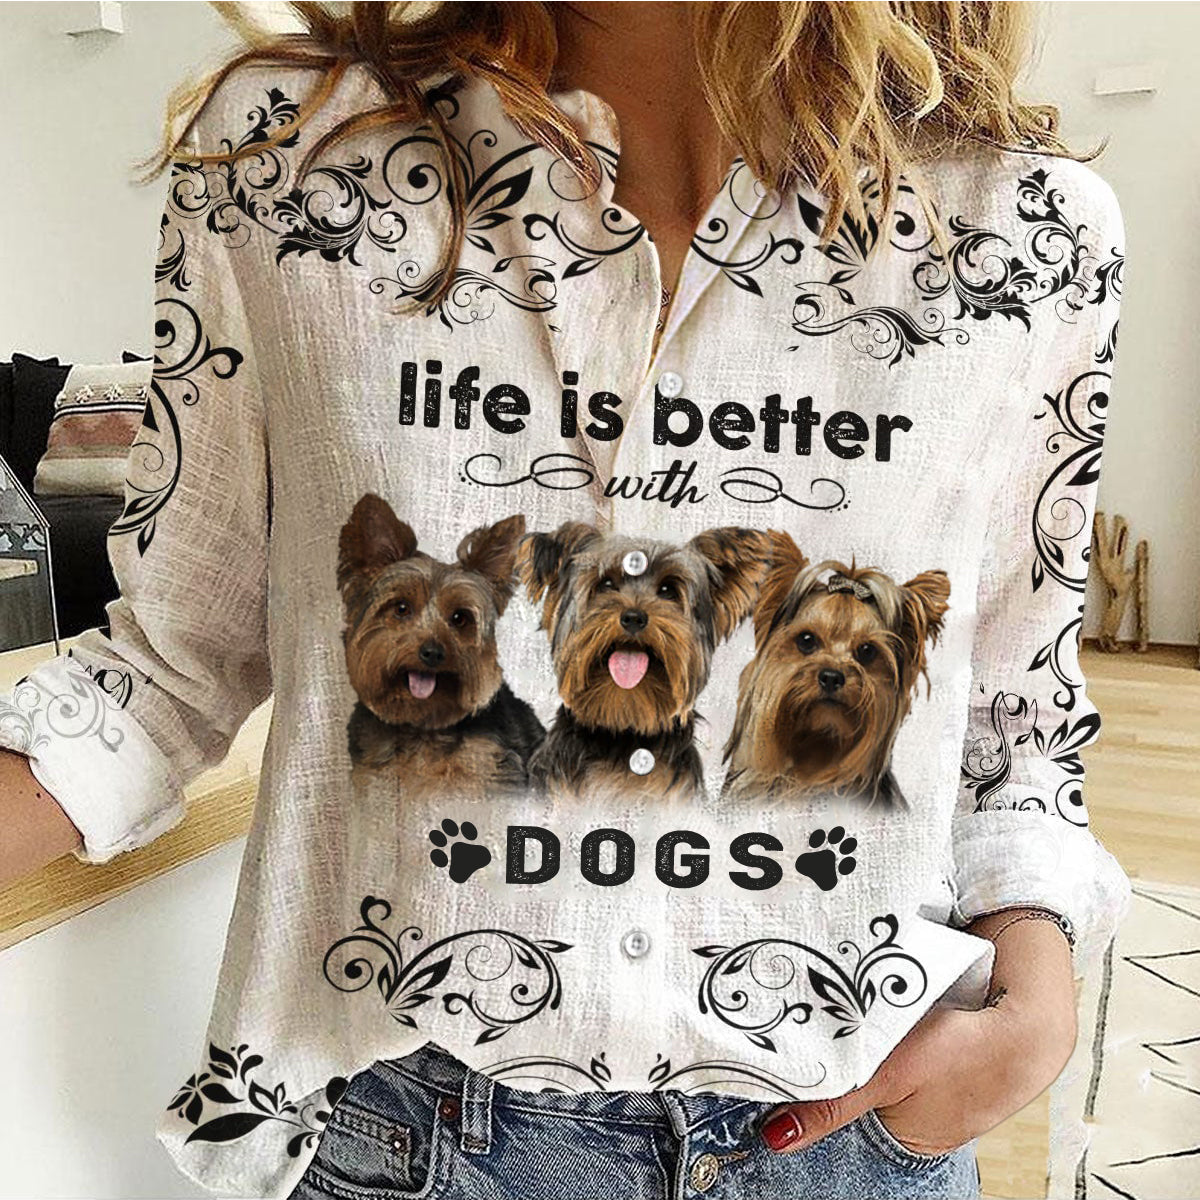 Yorkshire Terrier  - Life Is Better With Dogs Women's Long-Sleeve Shirt